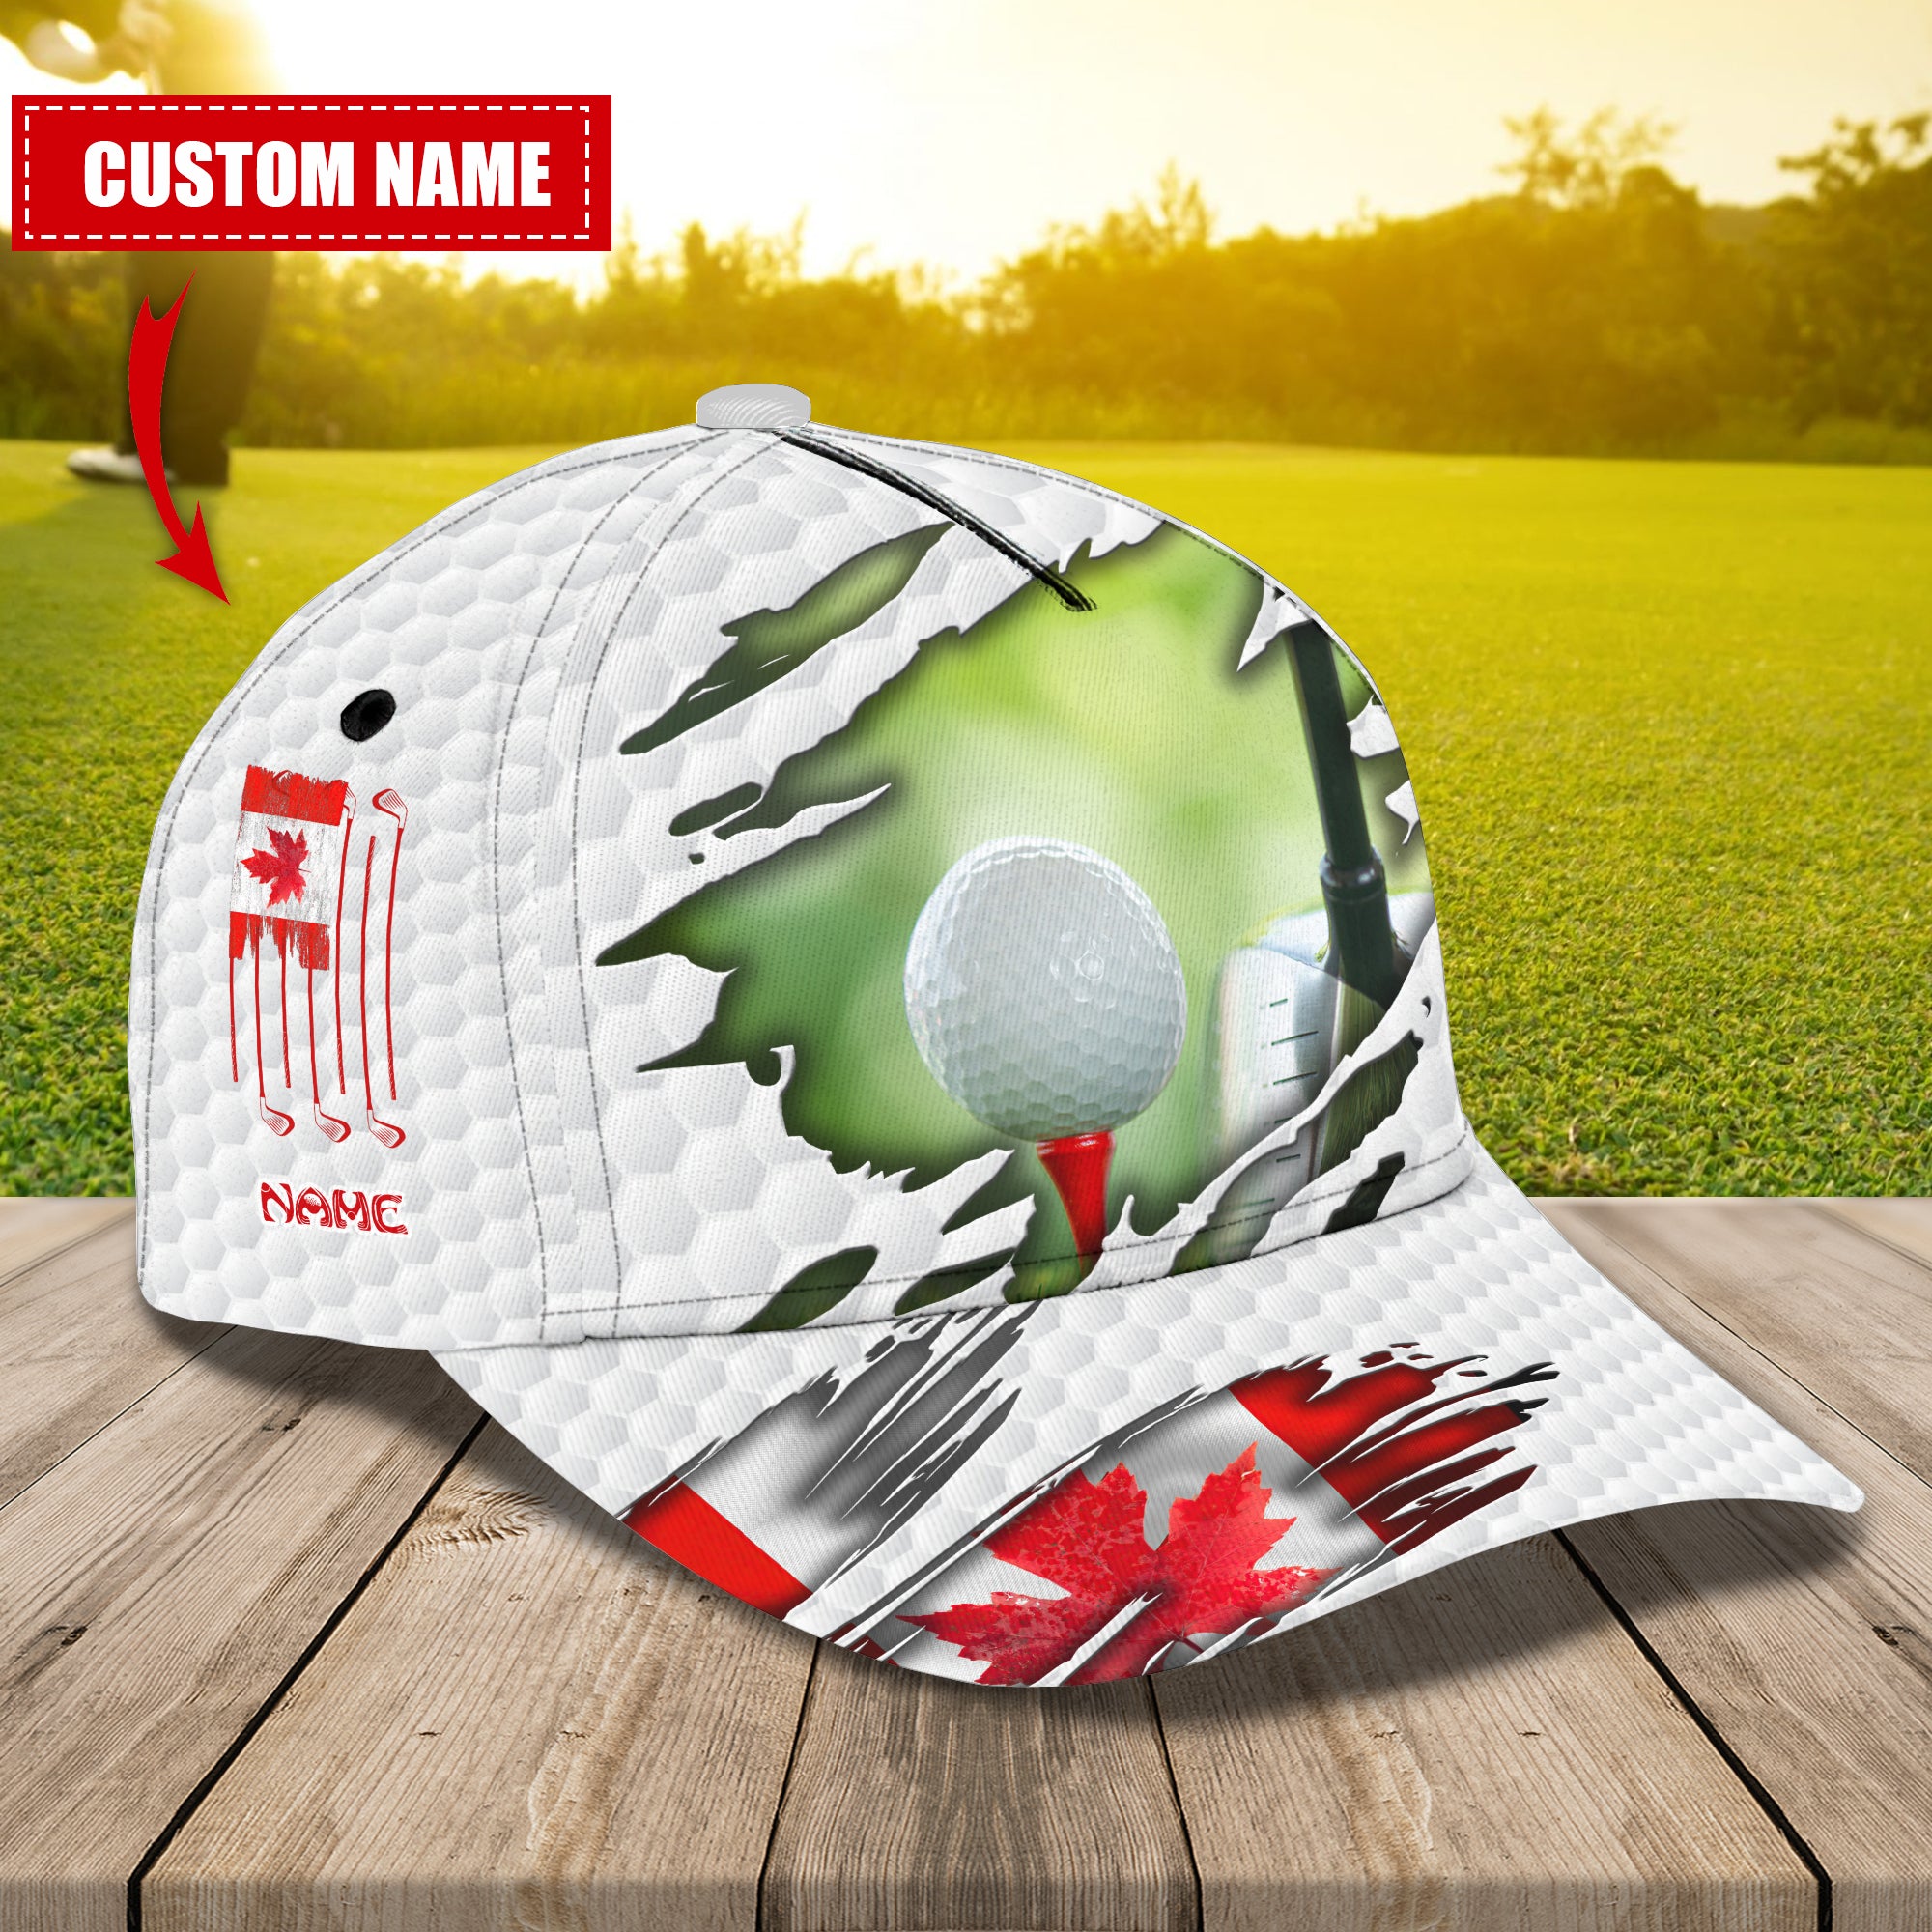 Golf - Personalized Name Cap - Atm2k-68